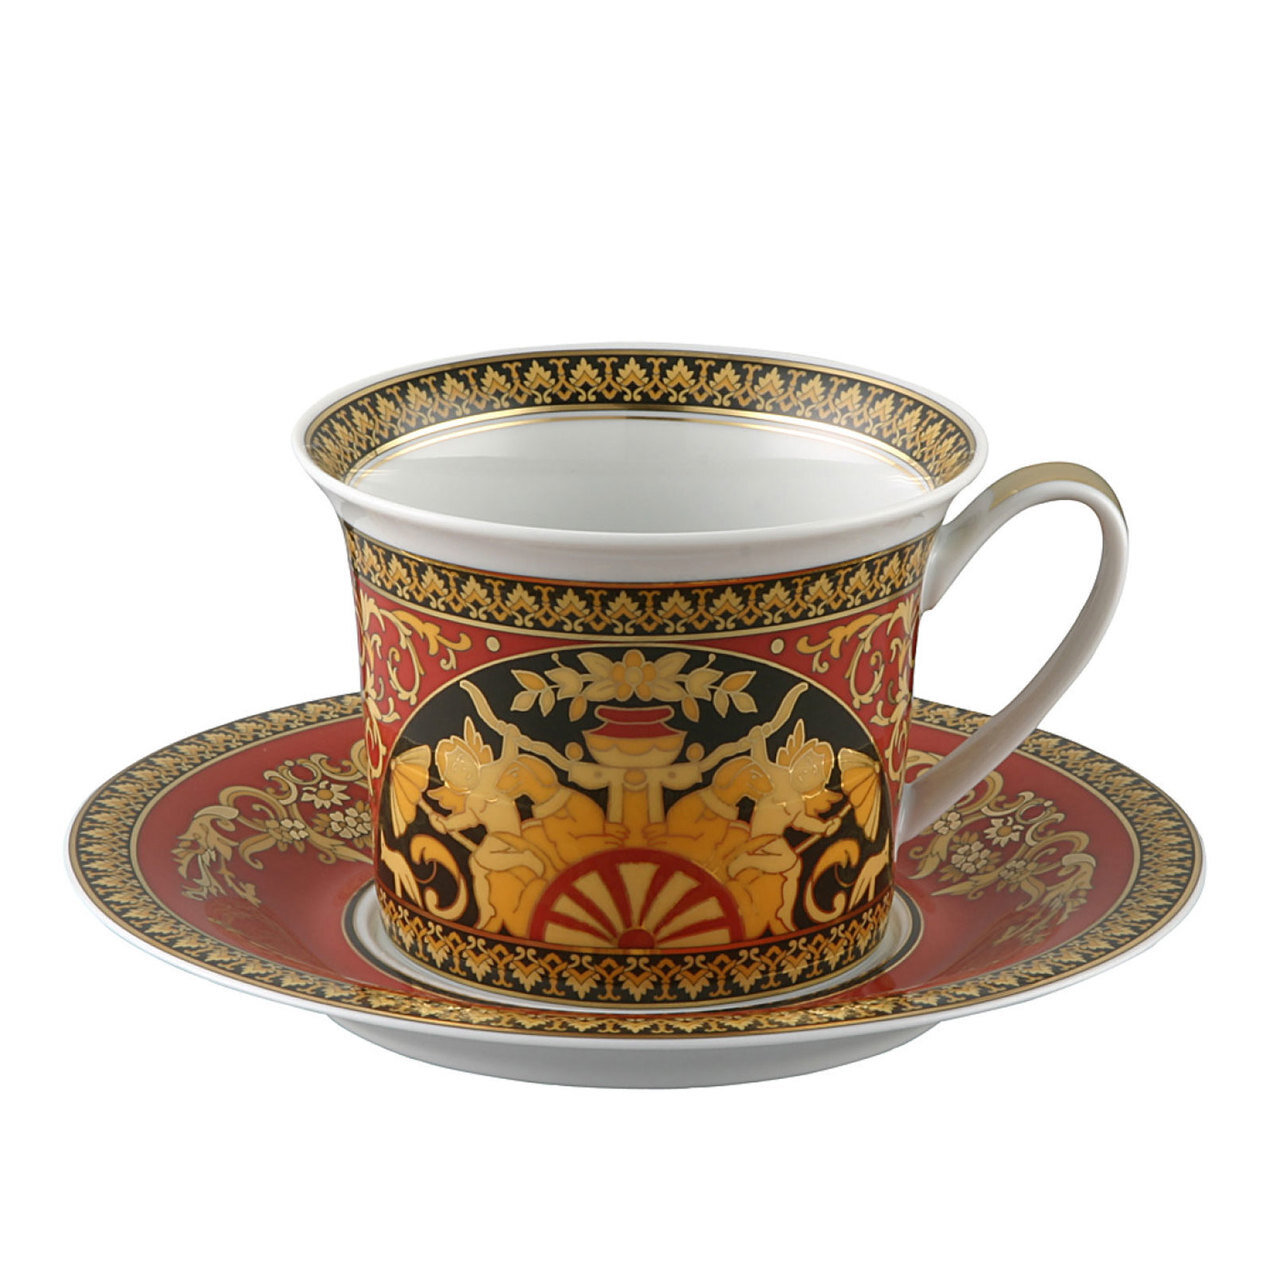 Versace Medusa Red Breakfast Cup and Saucer 7 Inch 13 oz.